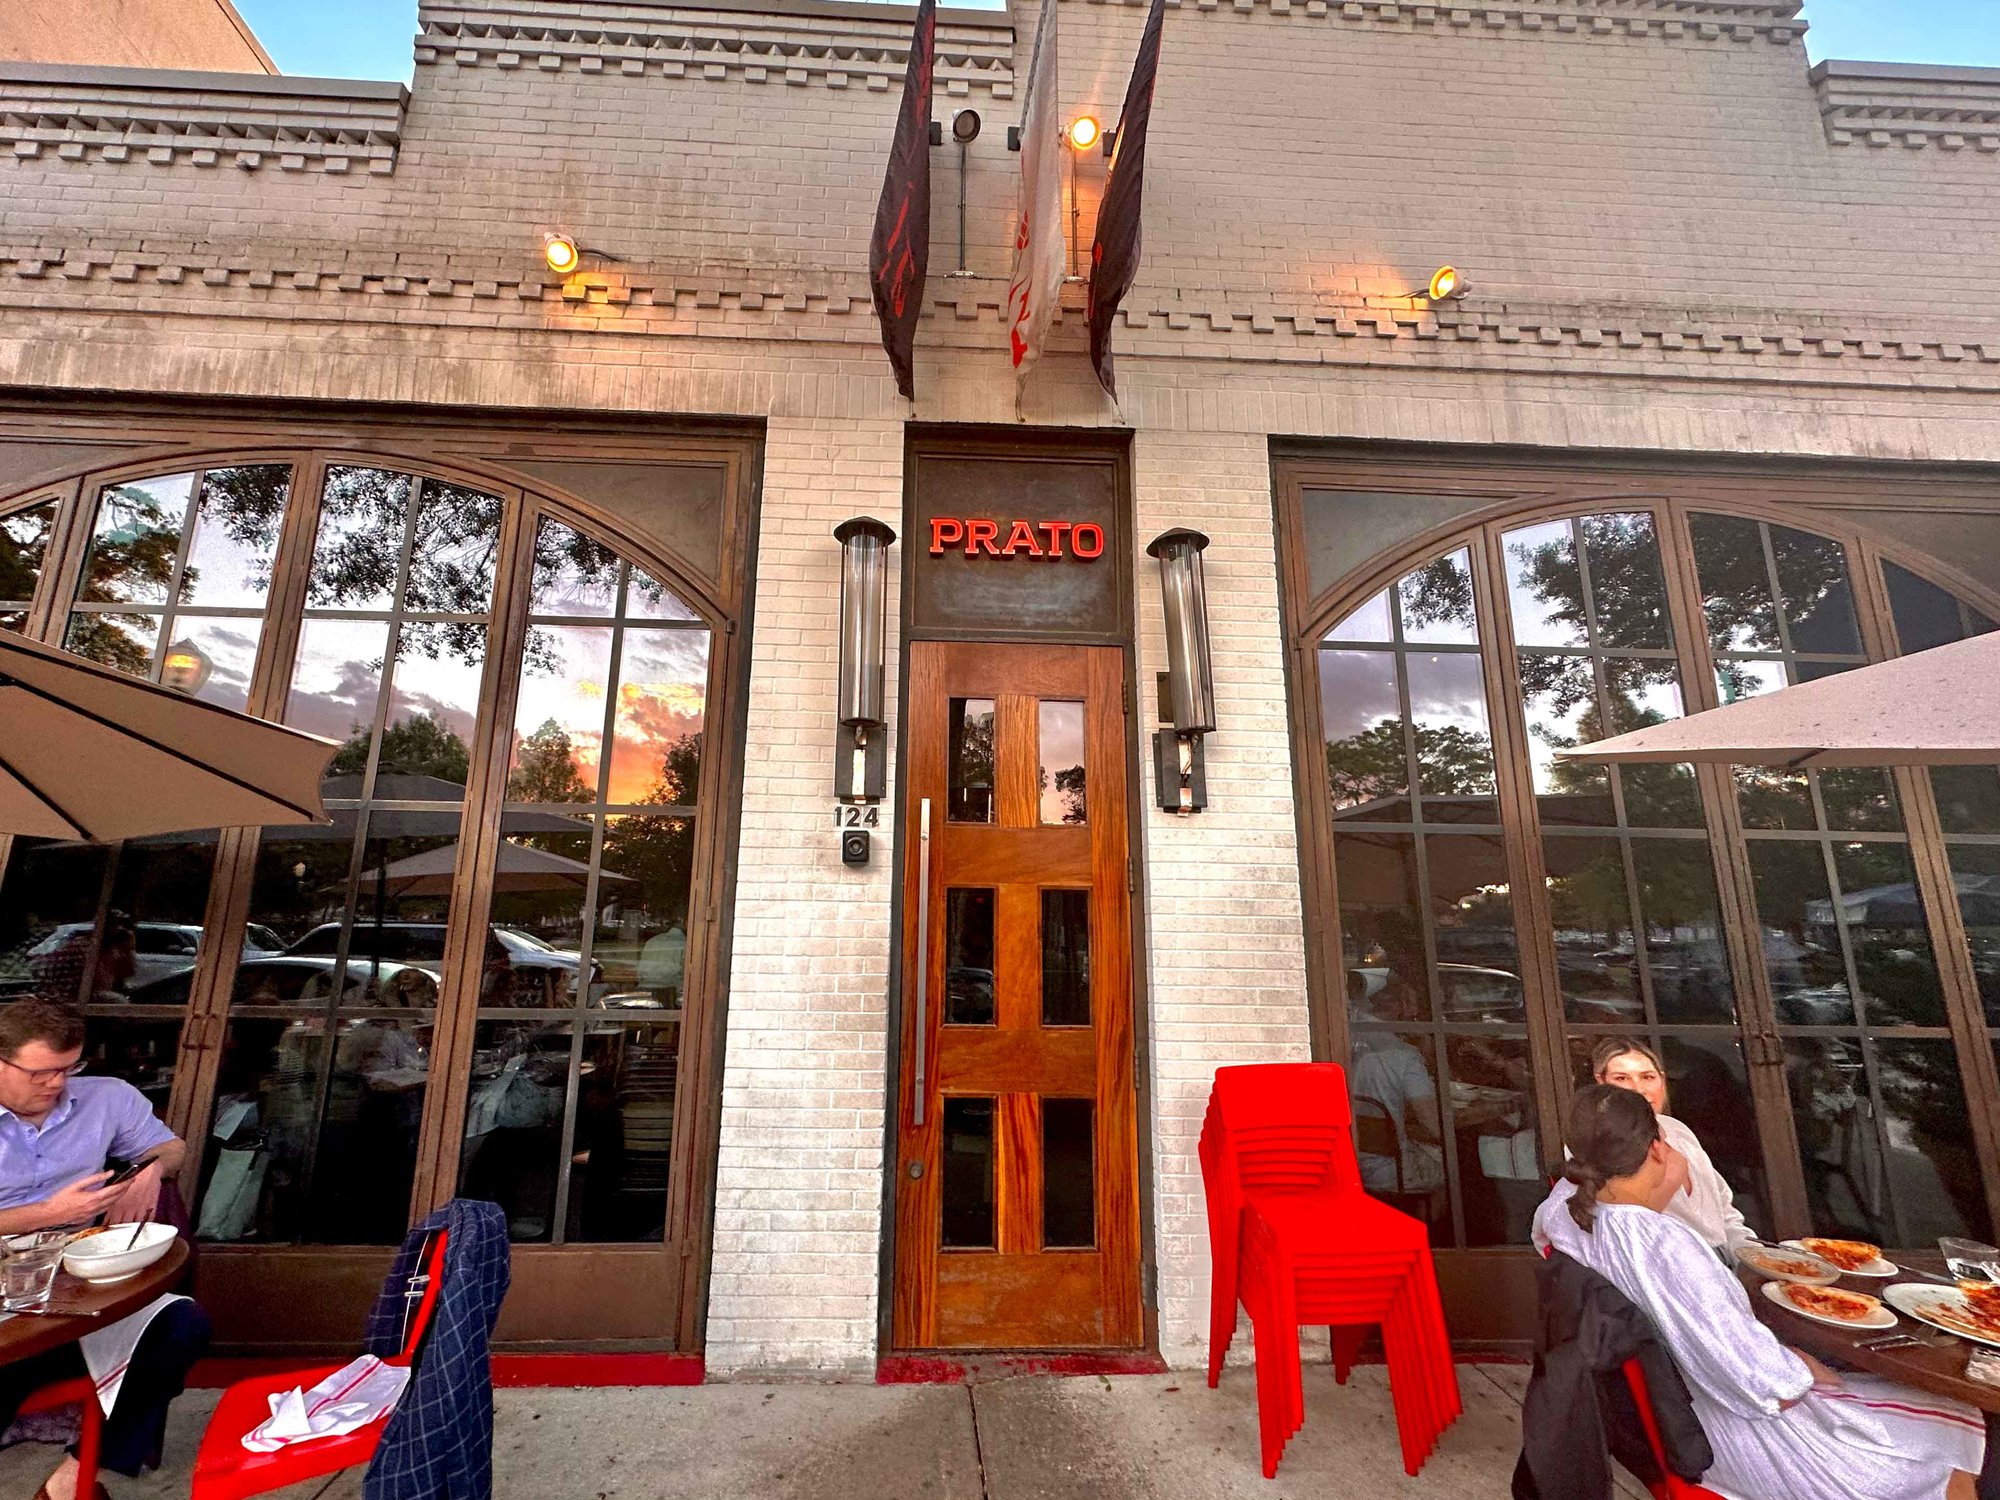 Exterior shot of Prato and outdoor diners